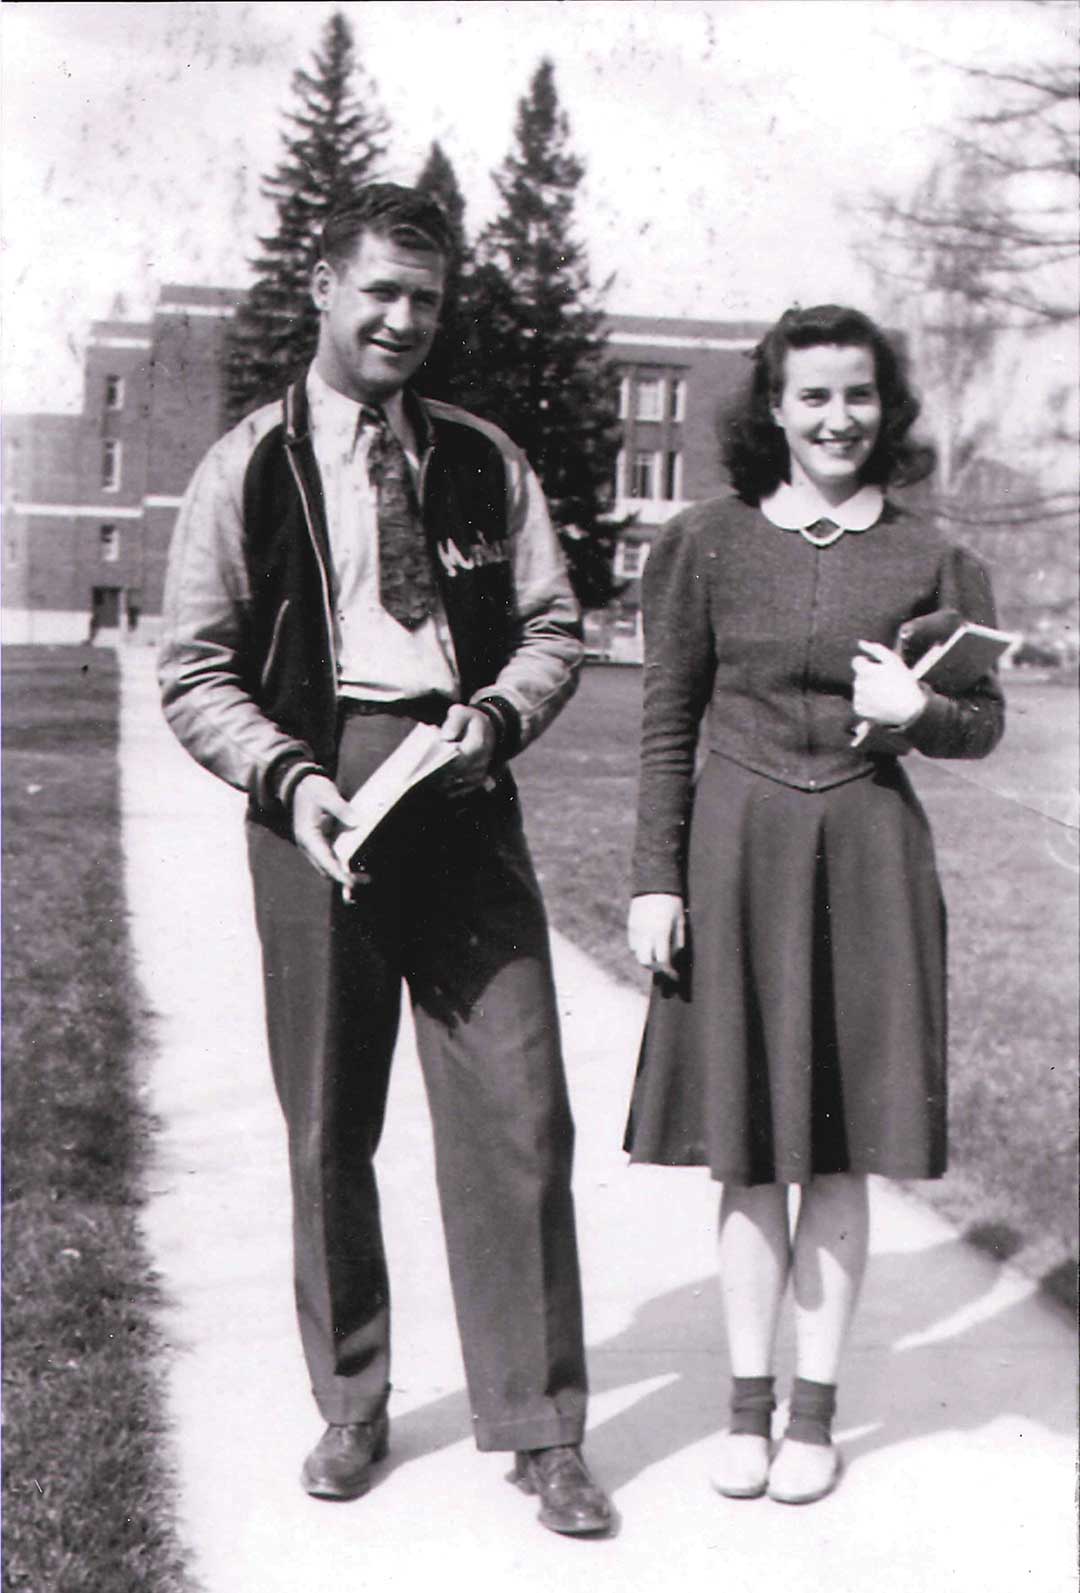 Tom O'Donnell and Barbara Adams